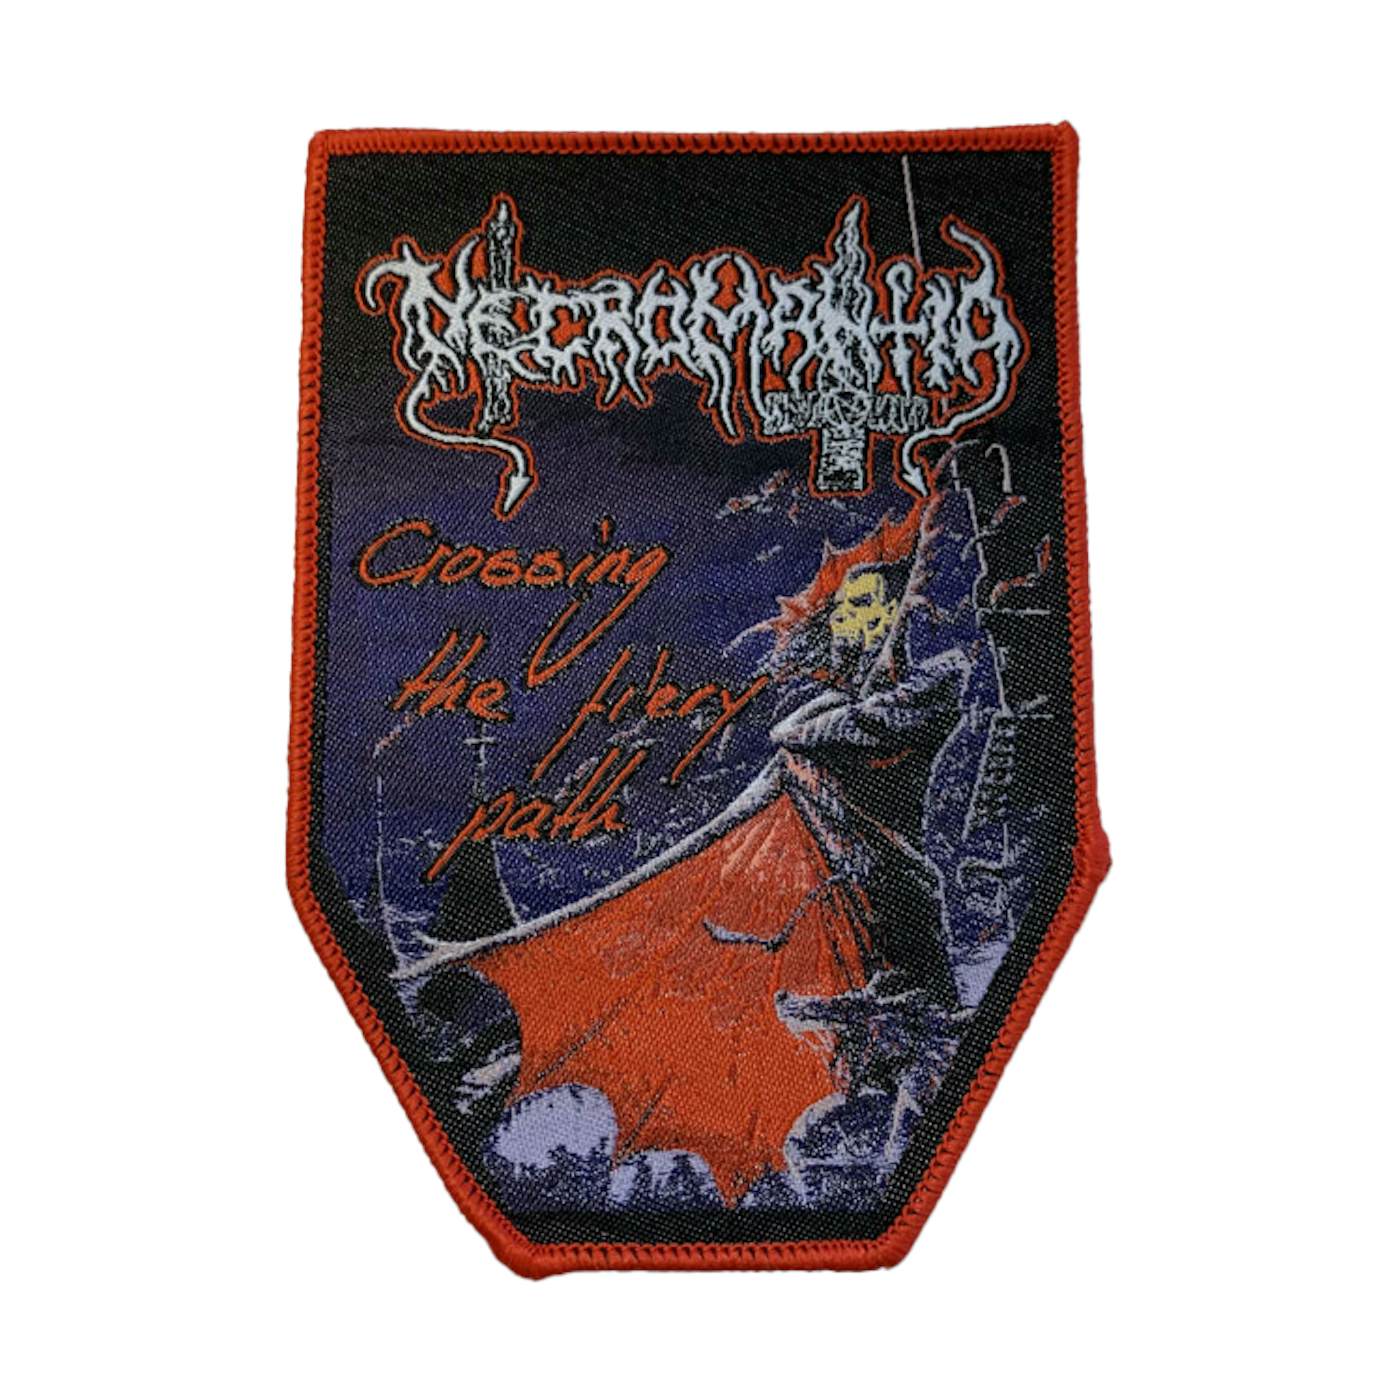 NECROMANTIA - 'Crossing The Fiery Path' Patch